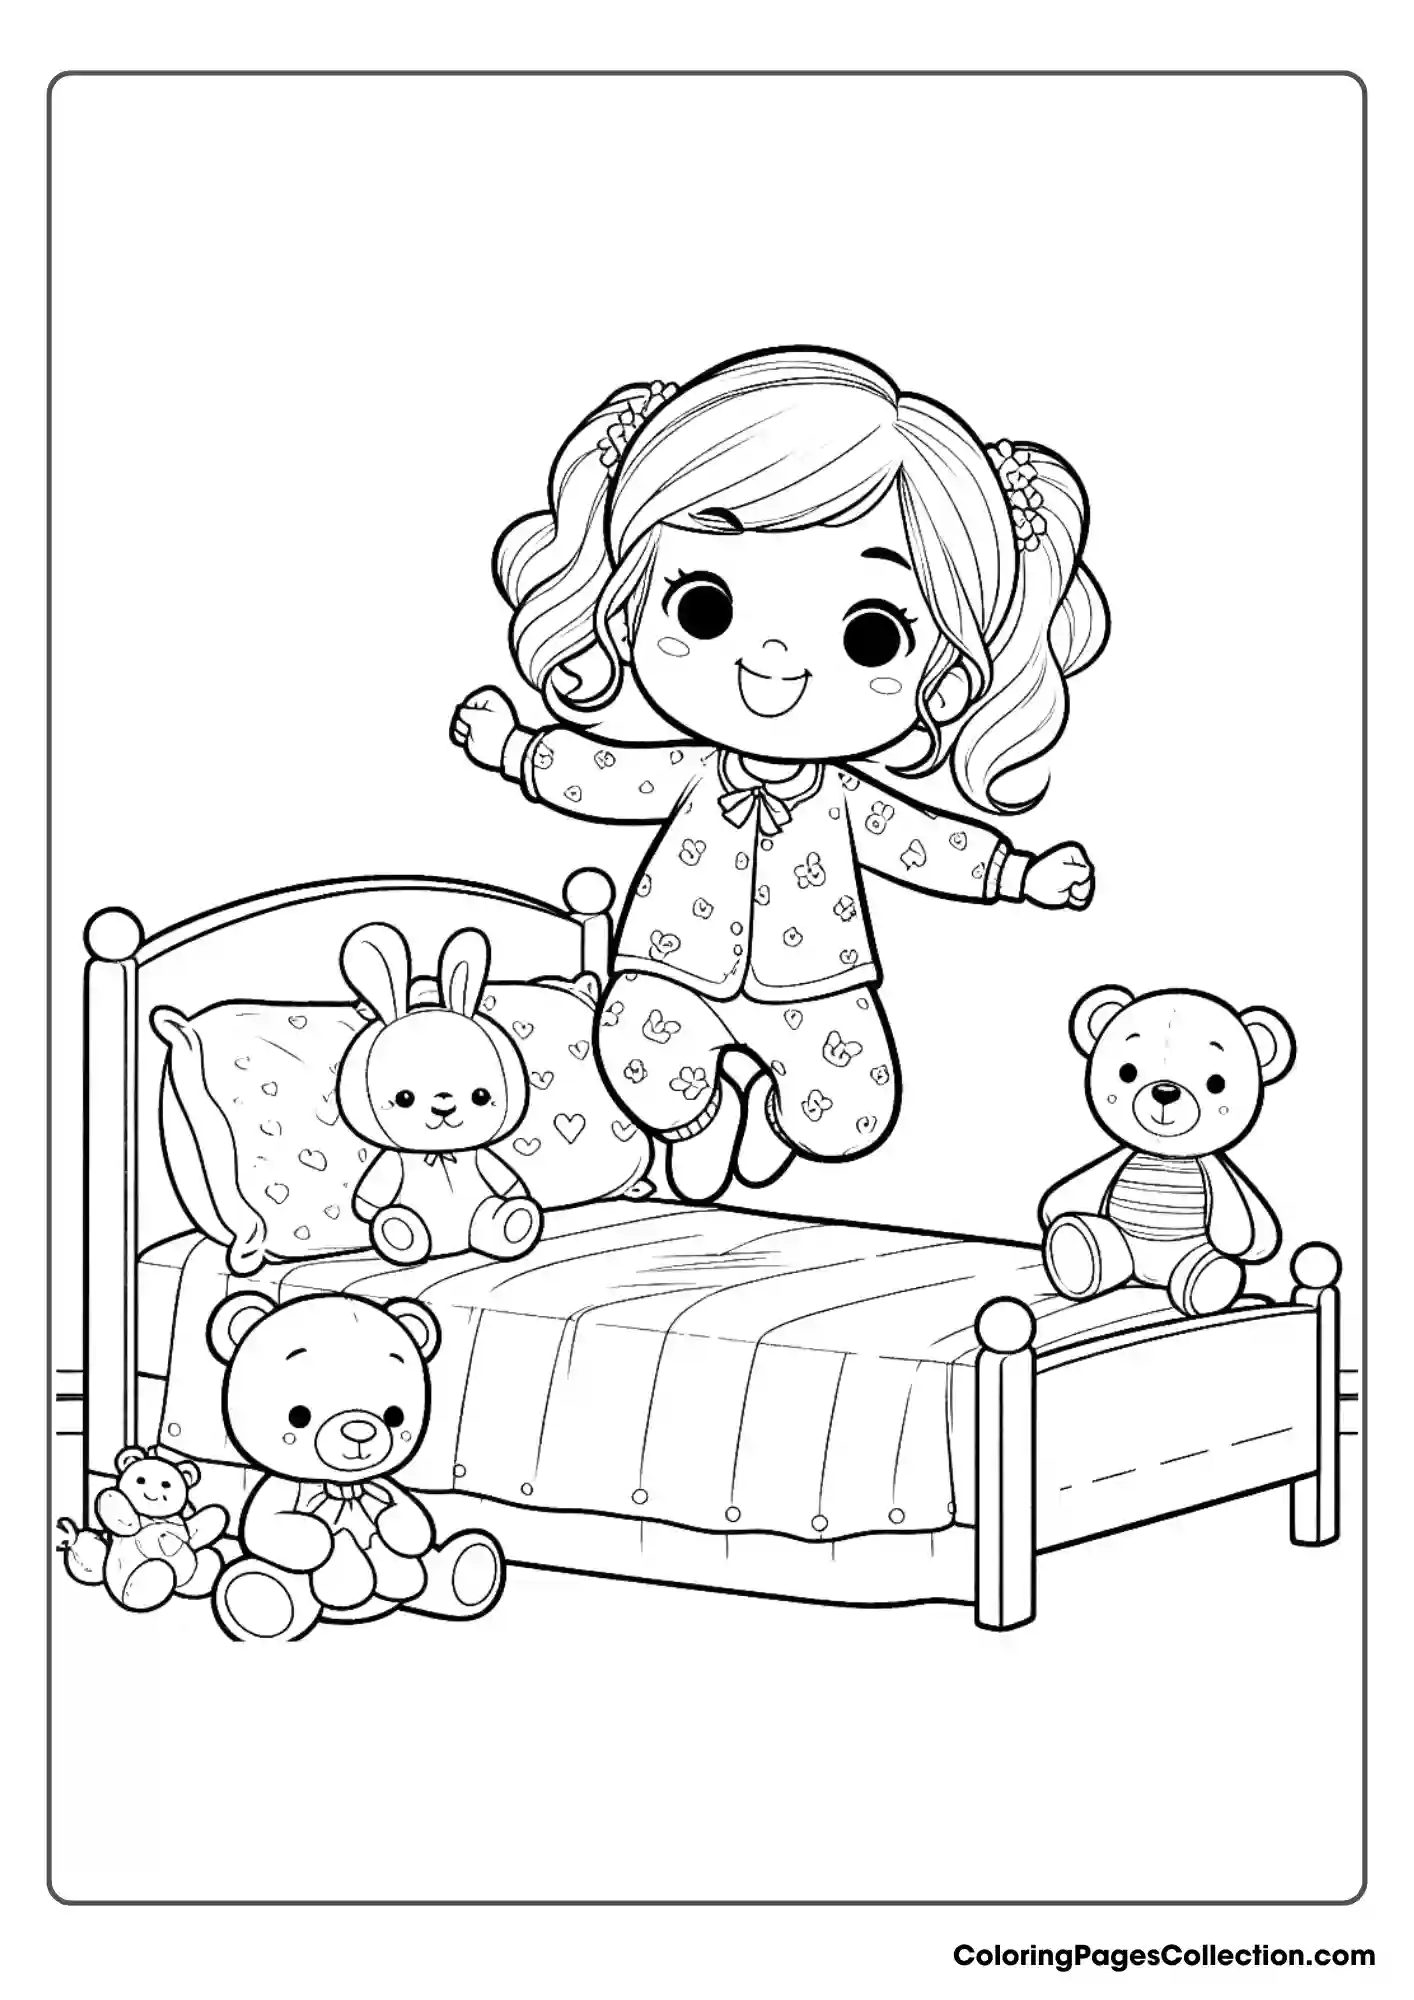 Little Girl Jumping On A Bed With Teddy Bears